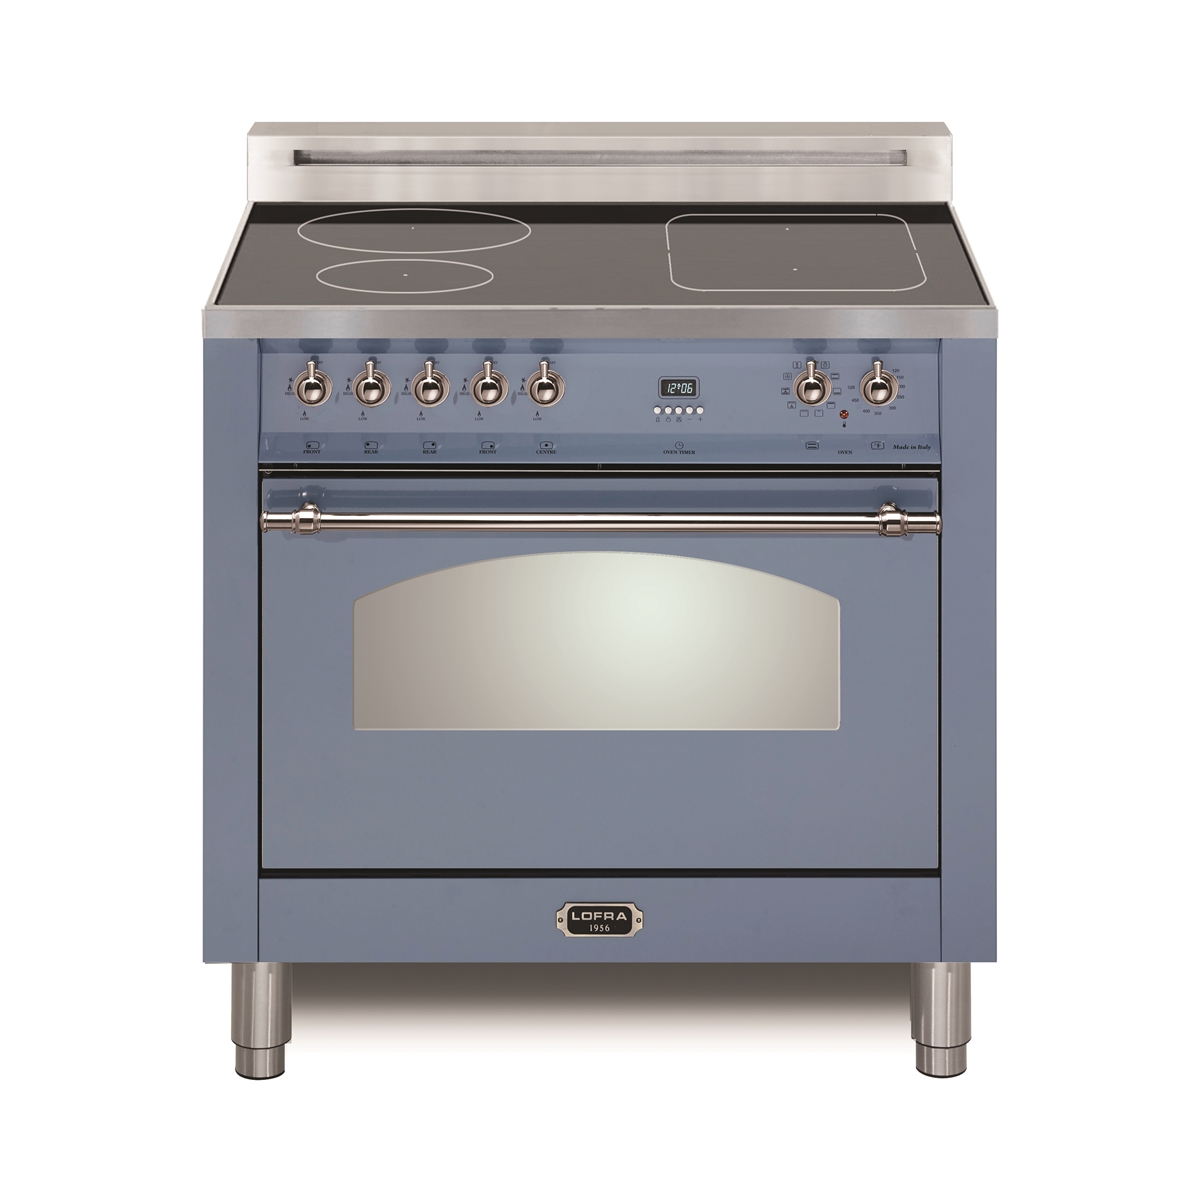 30 inch Induction Range, 4 Heating Zones, Electric Oven